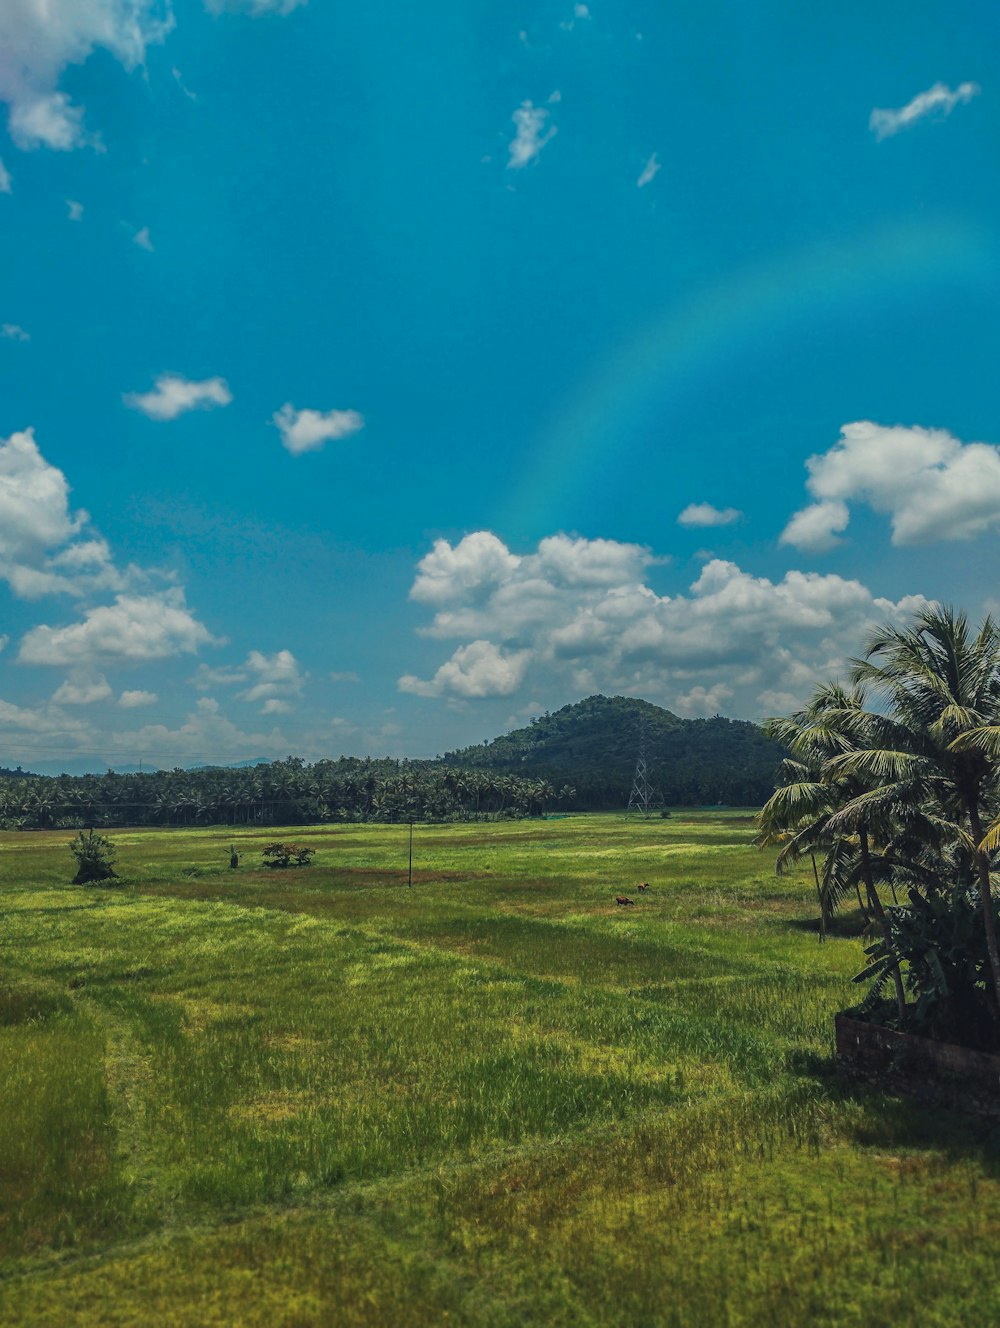 a rainbow in the sky over a lush green field